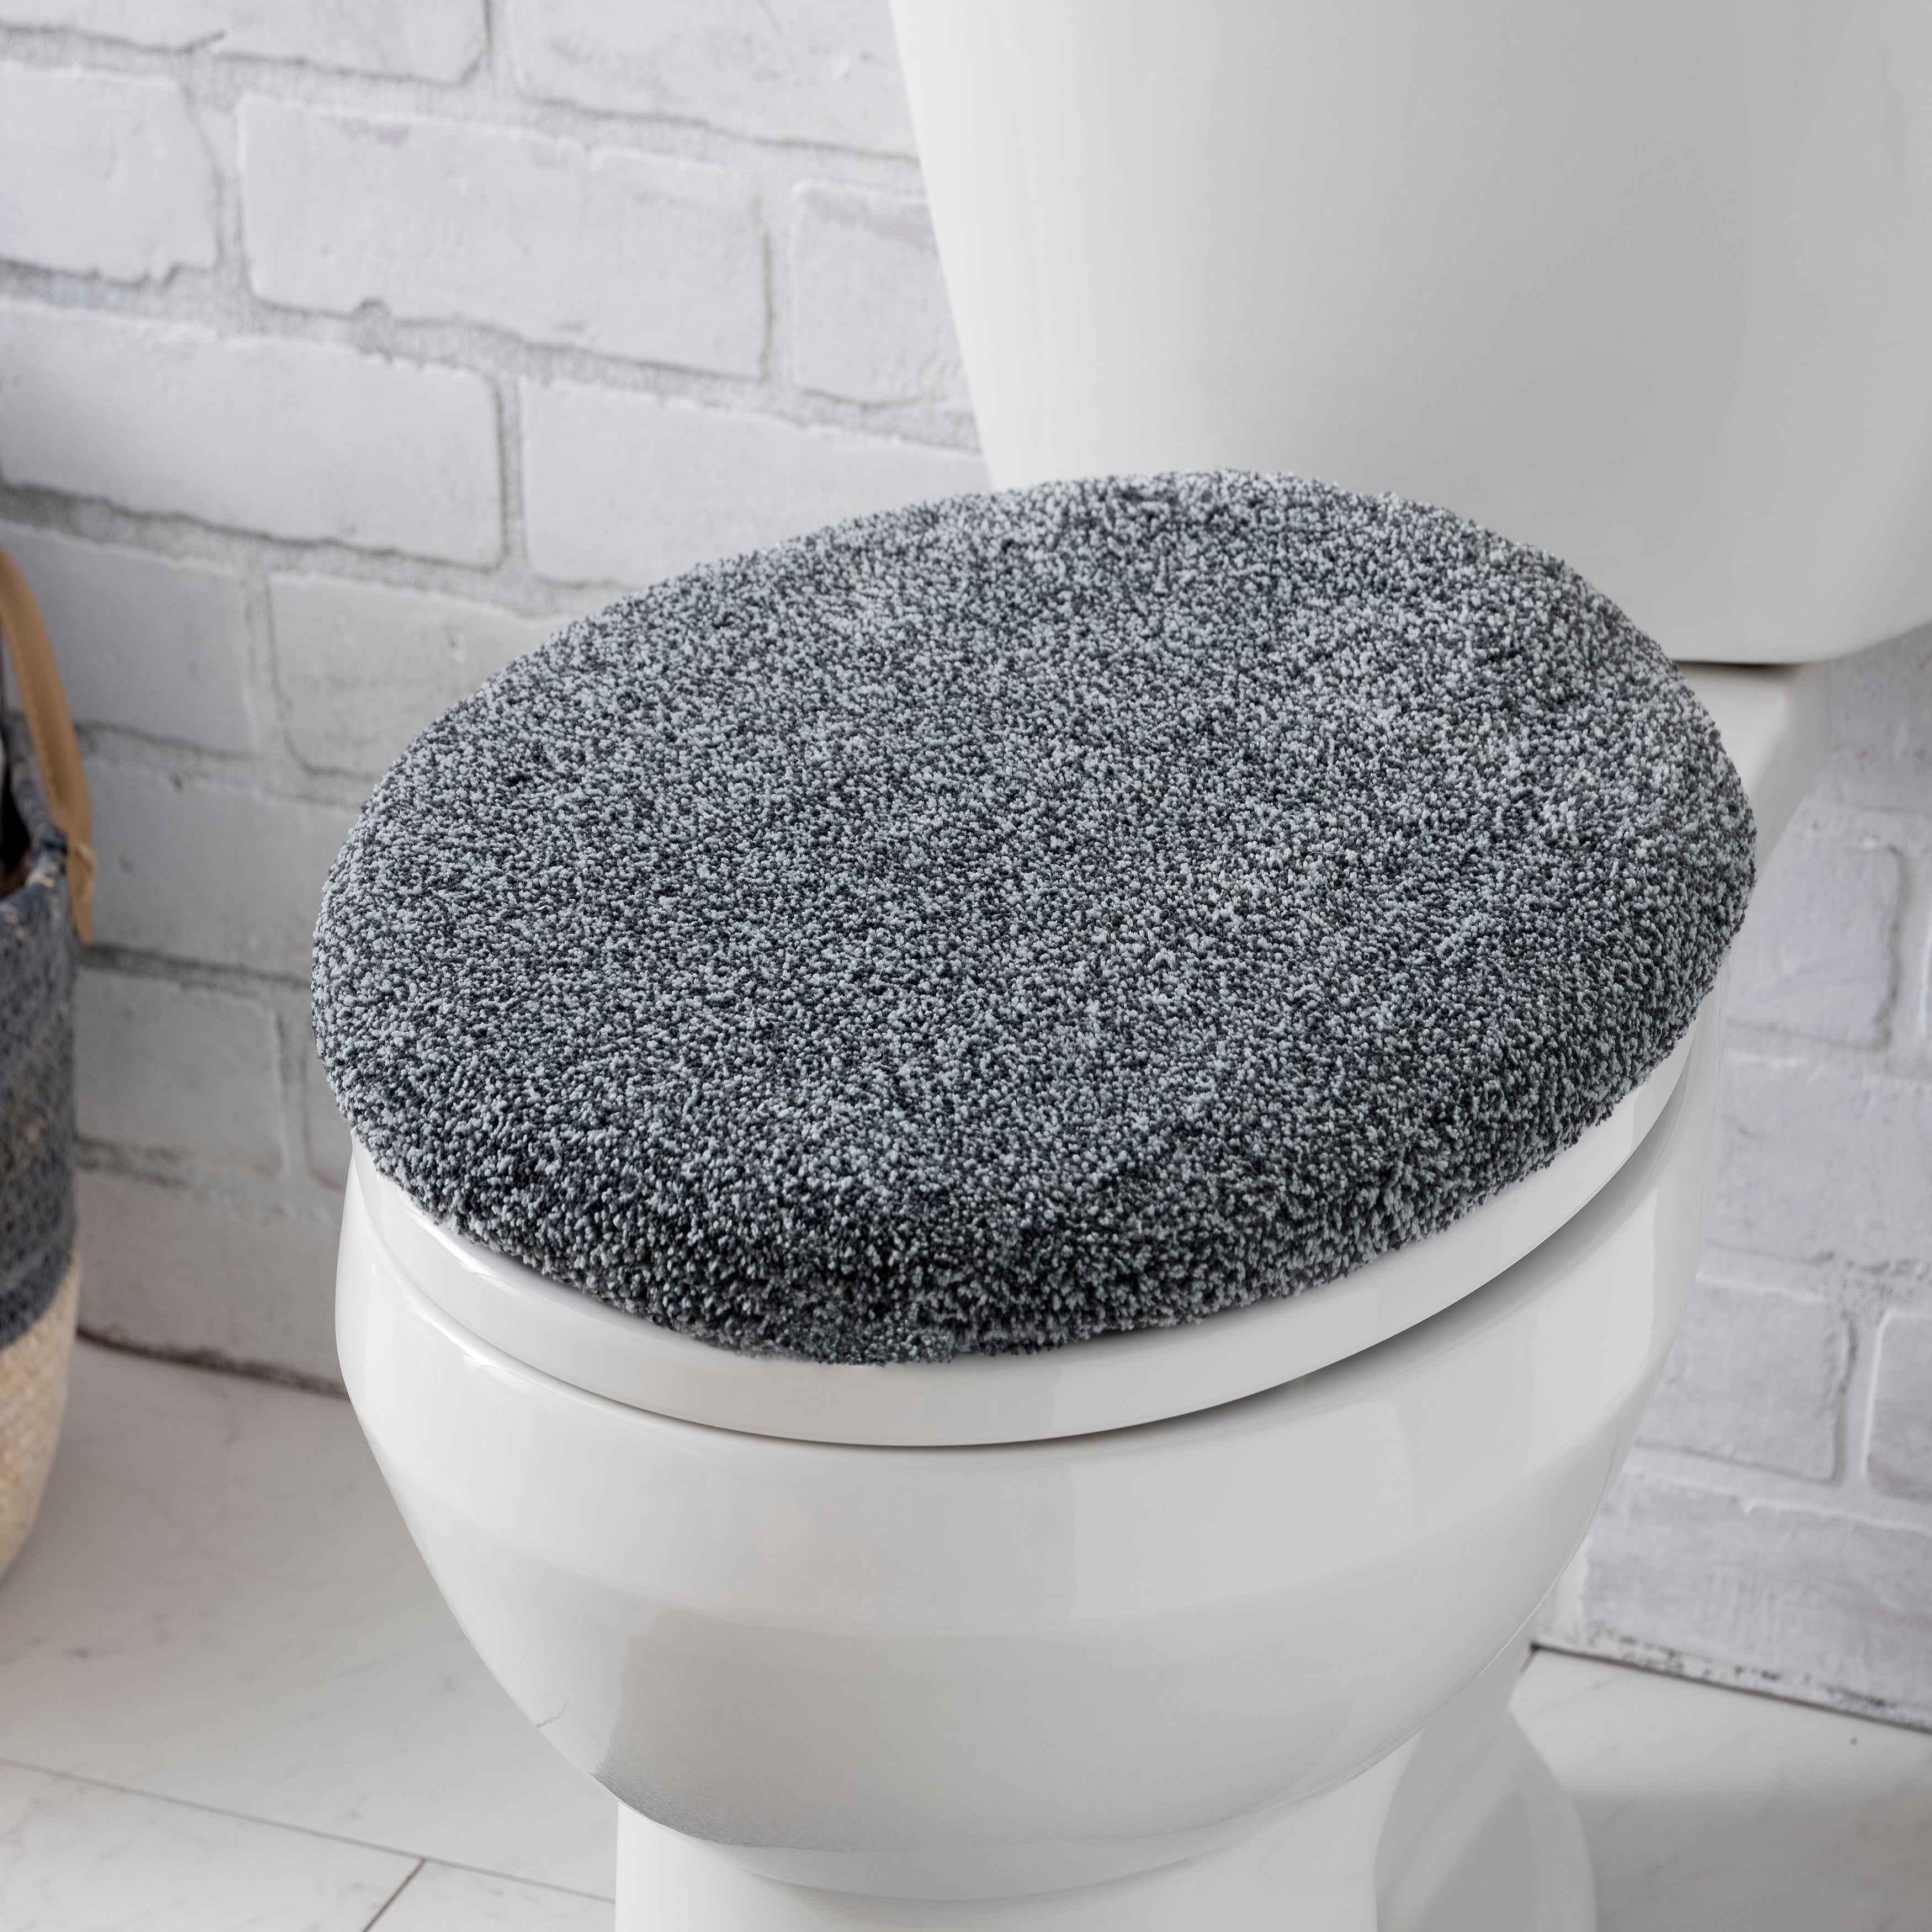 Details about   Bathroom Toilet Seat Cover Washable Warm Lid Top Cover Zipper Home Decorate Grey 